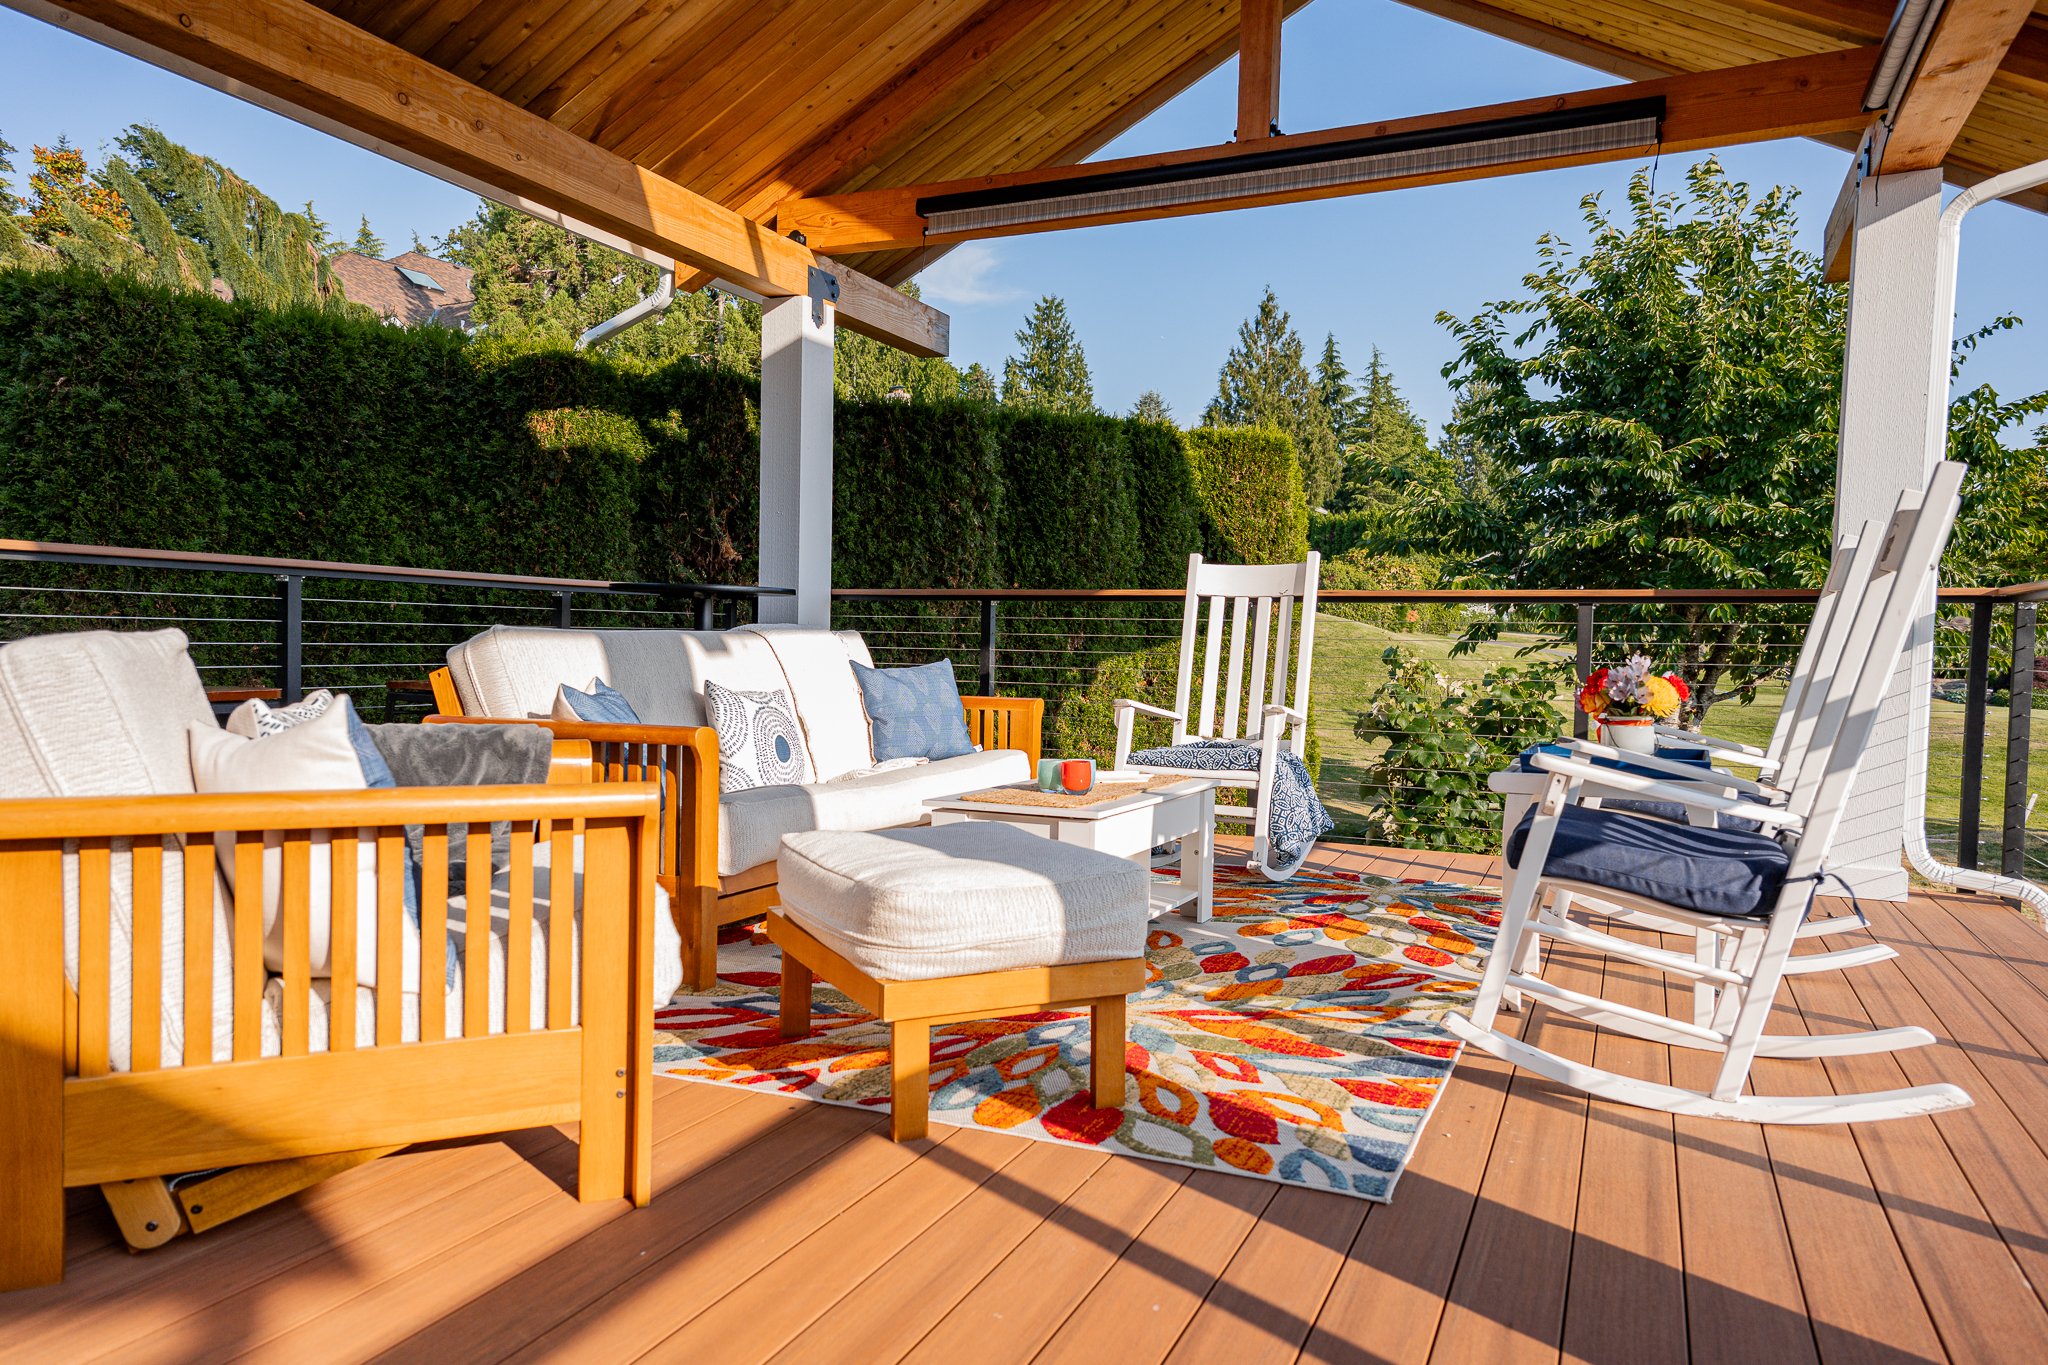 Stunning Deck Ideas for Small Yards